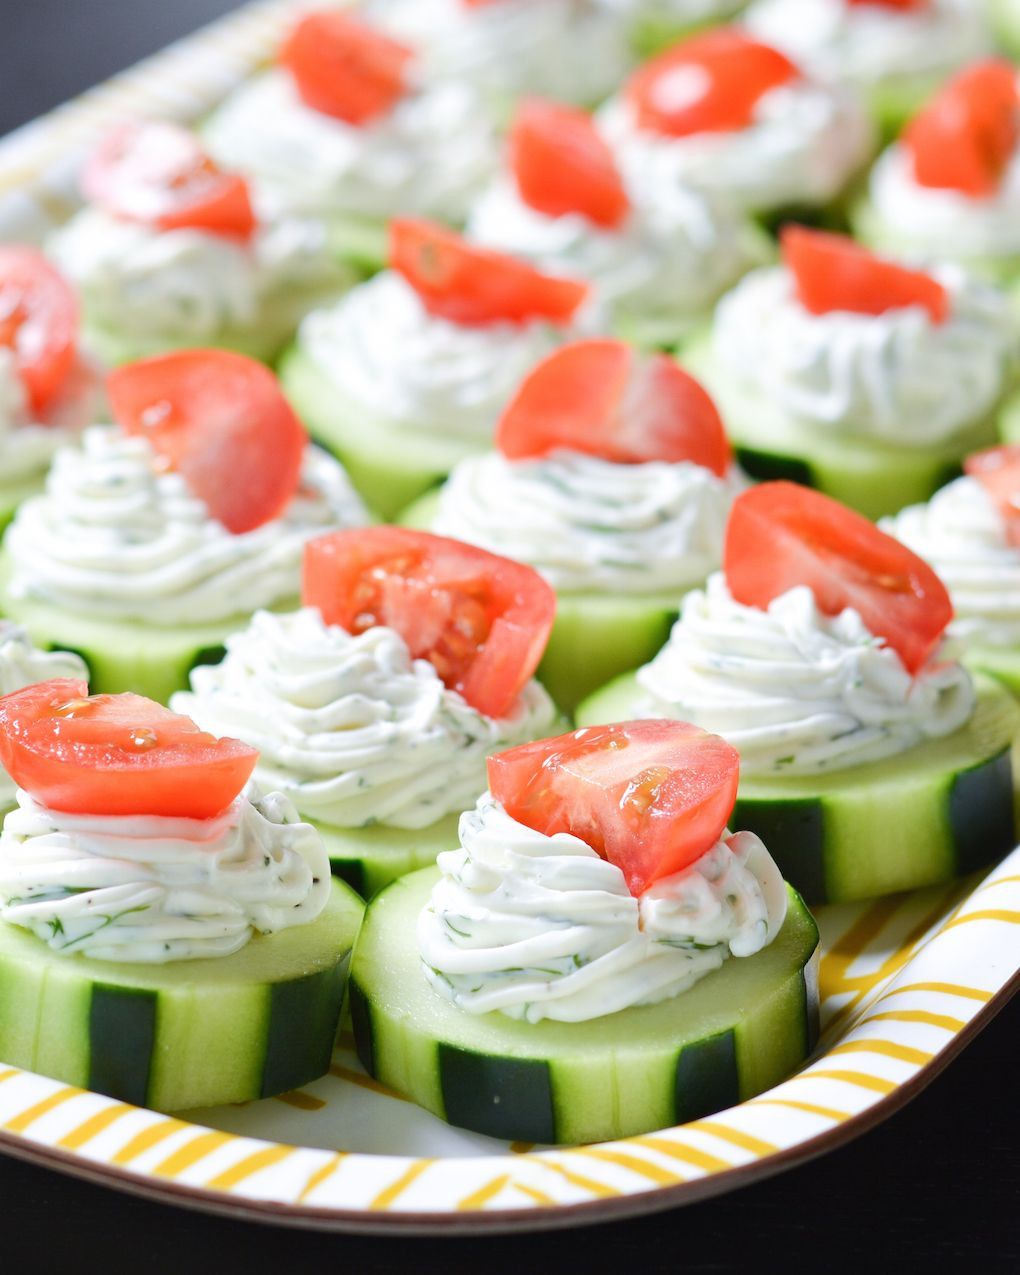 Cucumber Appetizers With Dill And Cream Cheese
 These fresh Dilly Cucumber Bites make a great healthy